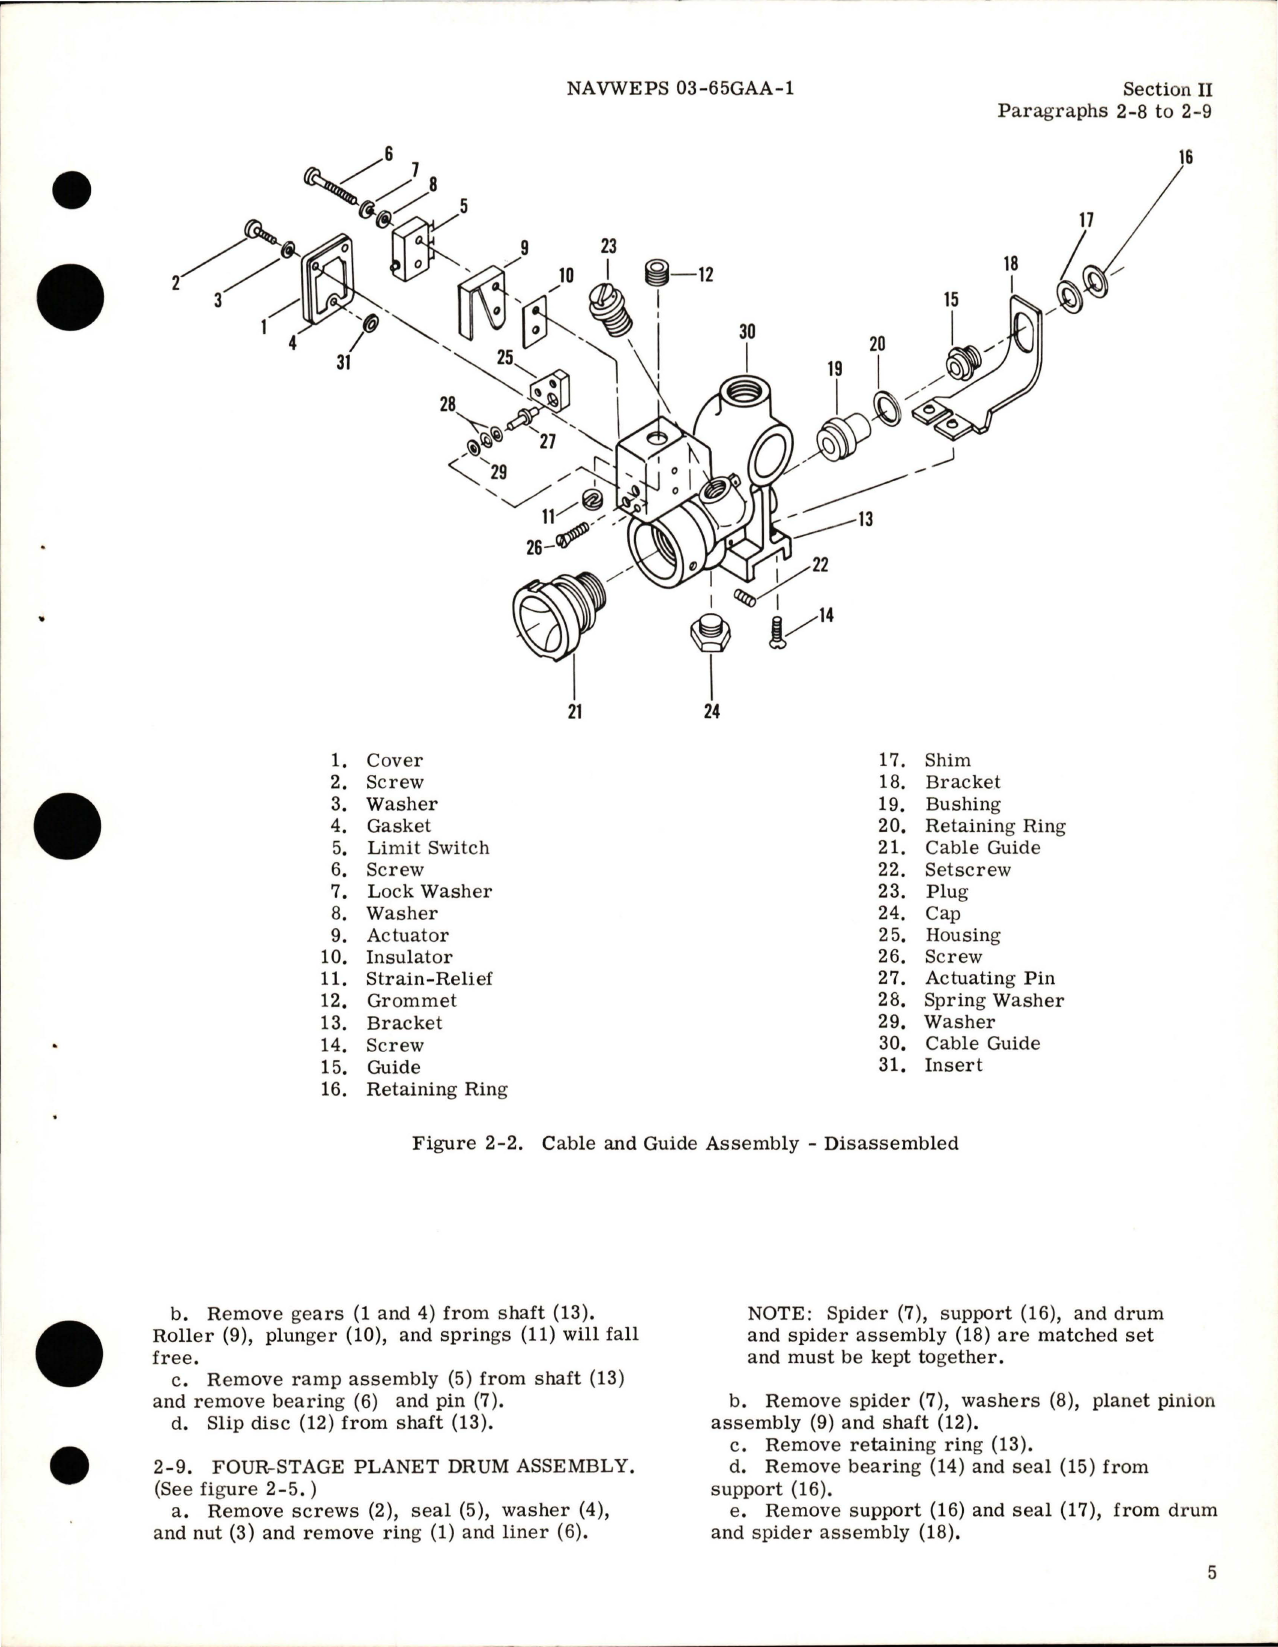 Sample page 9 from AirCorps Library document: Overhaul Instructions for Cargo Boom Winch Assembly - Part 6153-62360-1